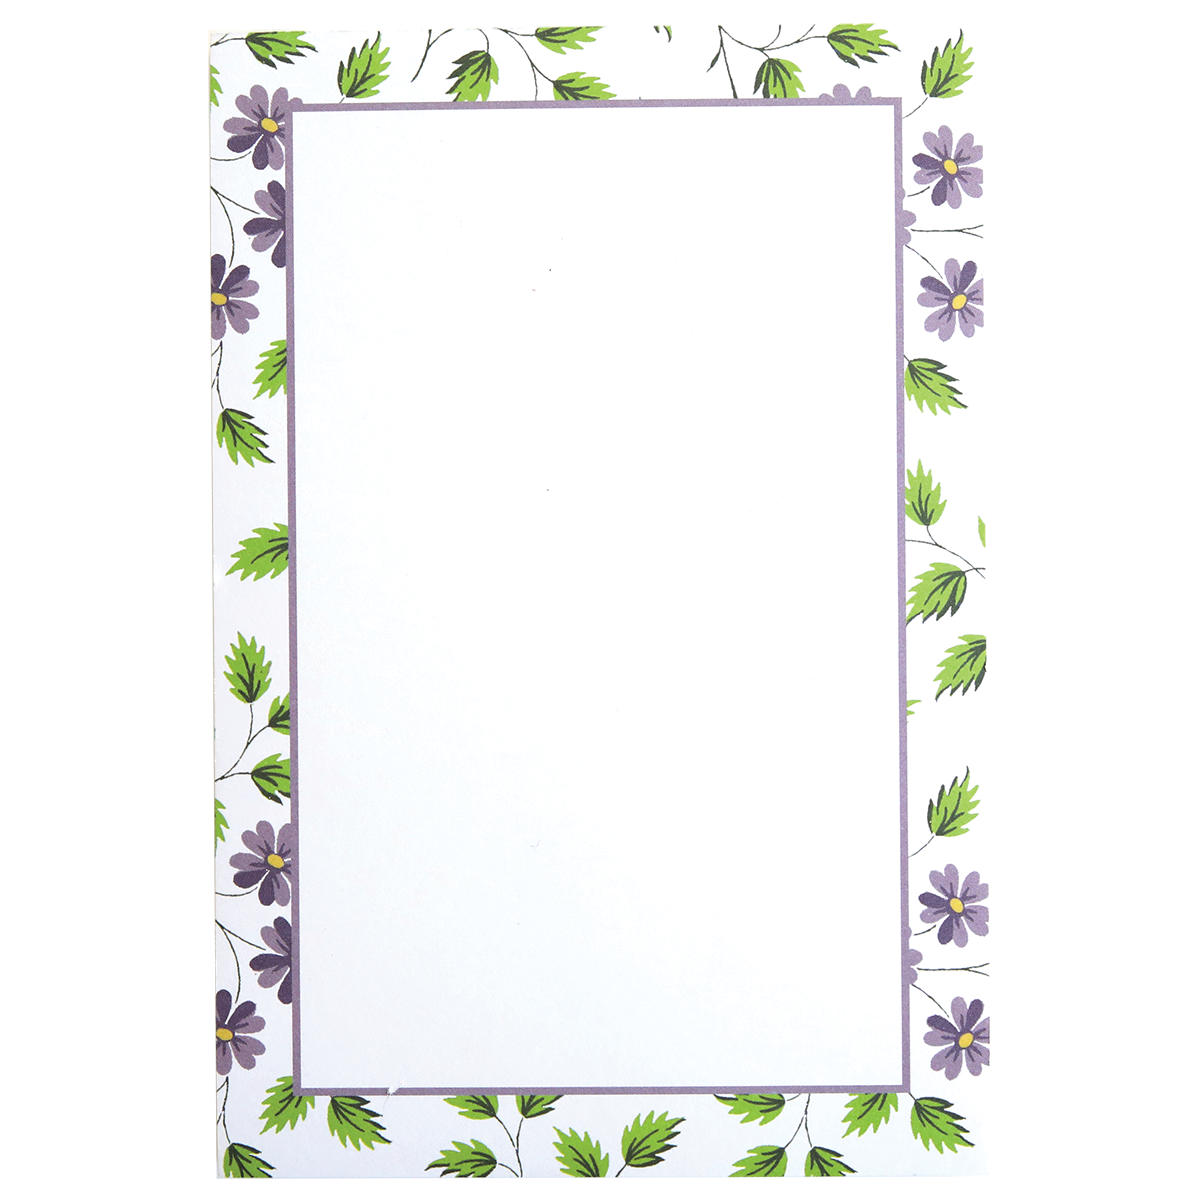 Astrid stationery note pads with a size of 300 sheets, framed by purple flowers and green leaves border.